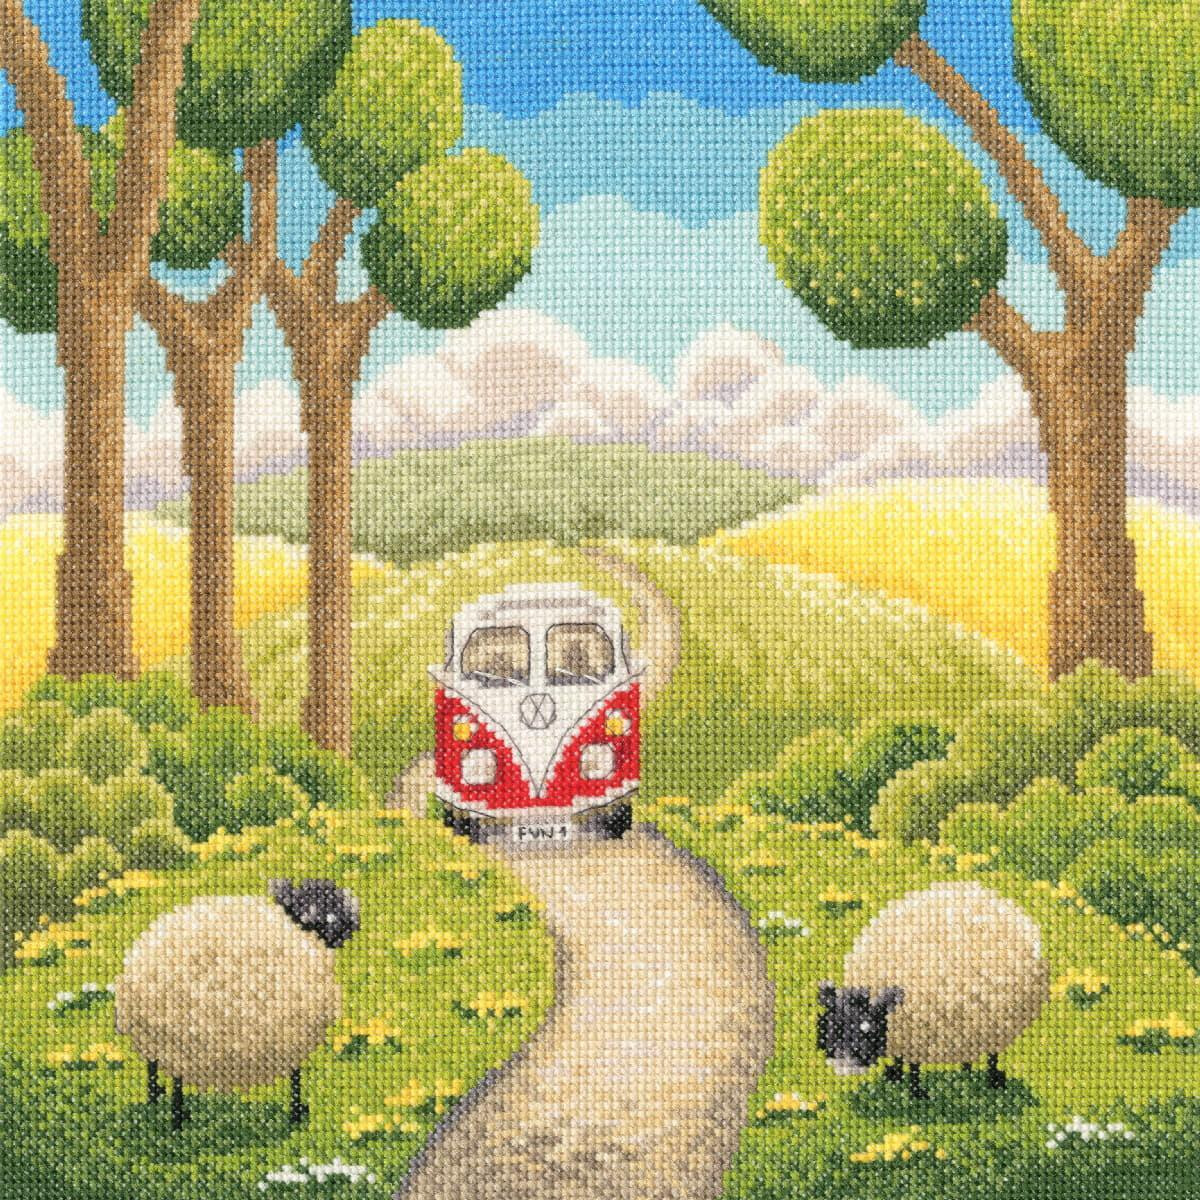 Bothy Threads counted cross stitch kit "Road...